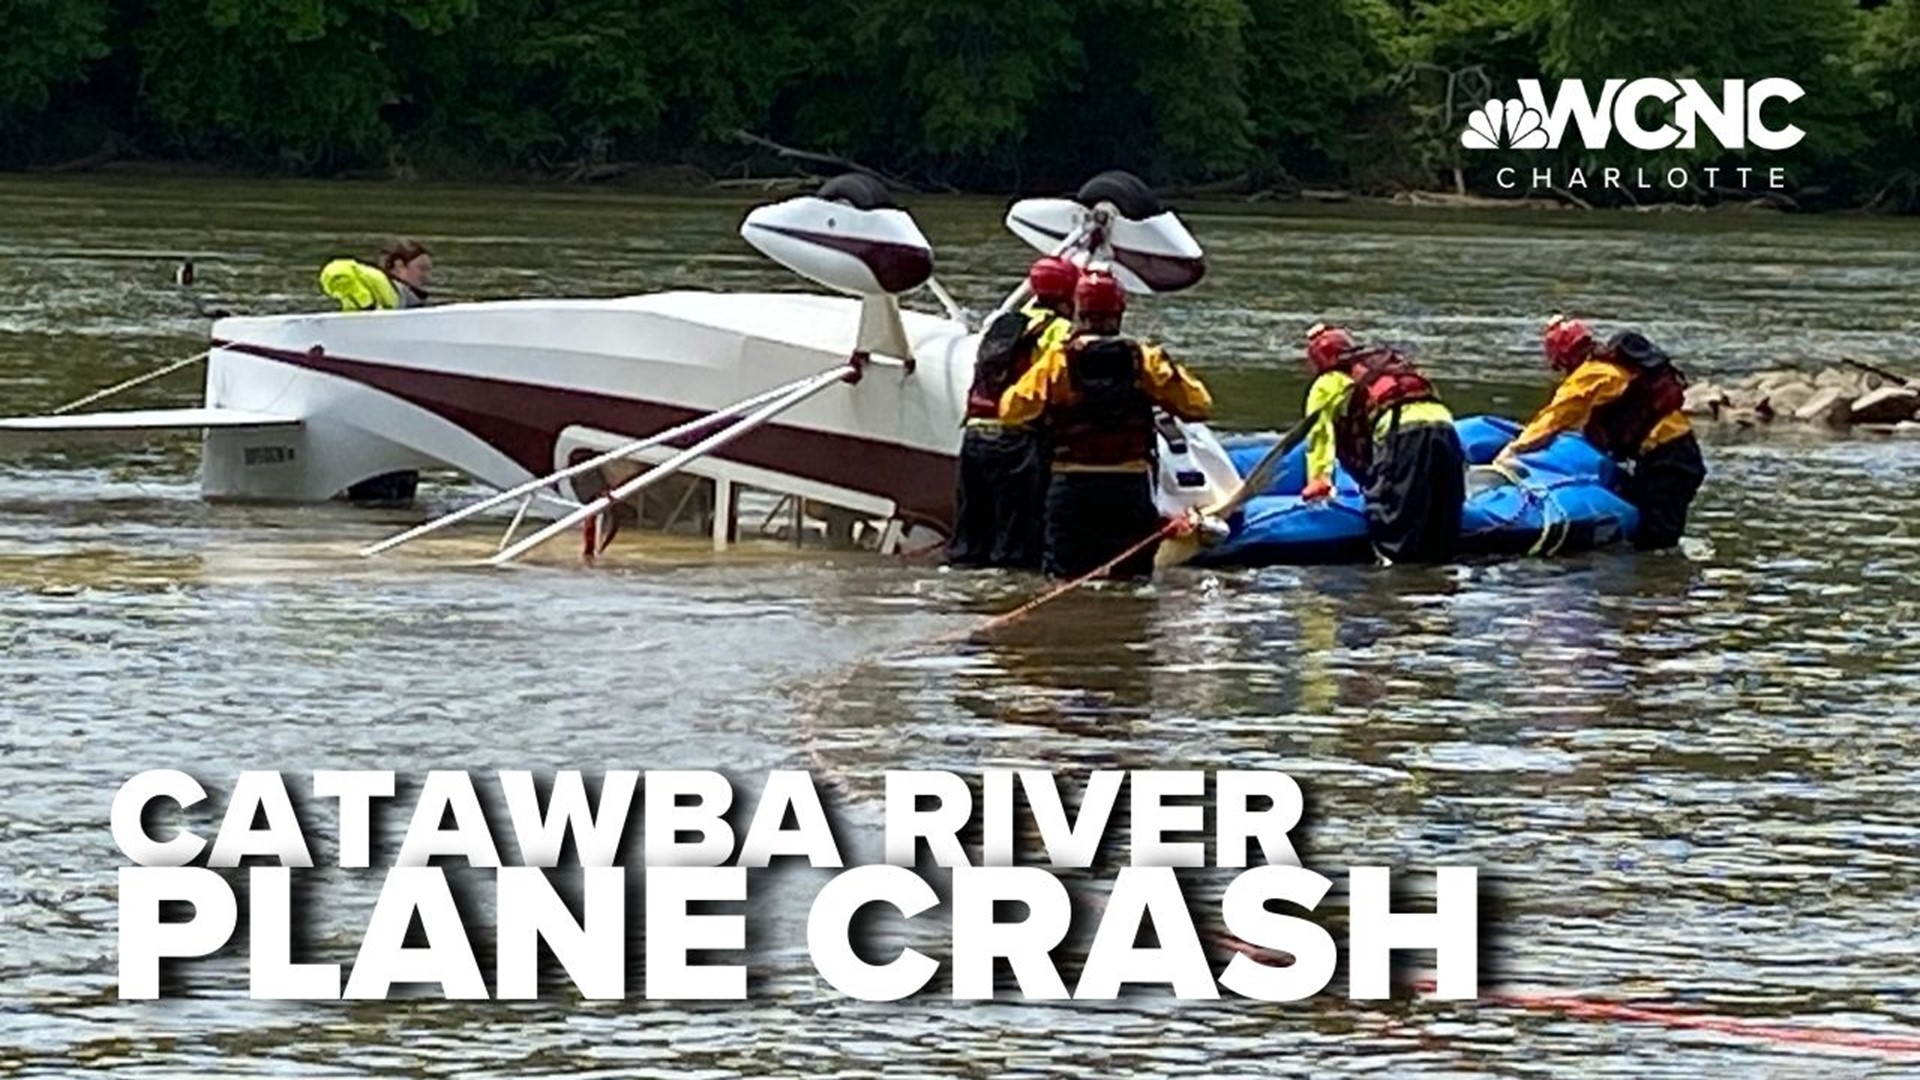 Two people are safe after the small plane crashed into the Catawba River in South Carolina.